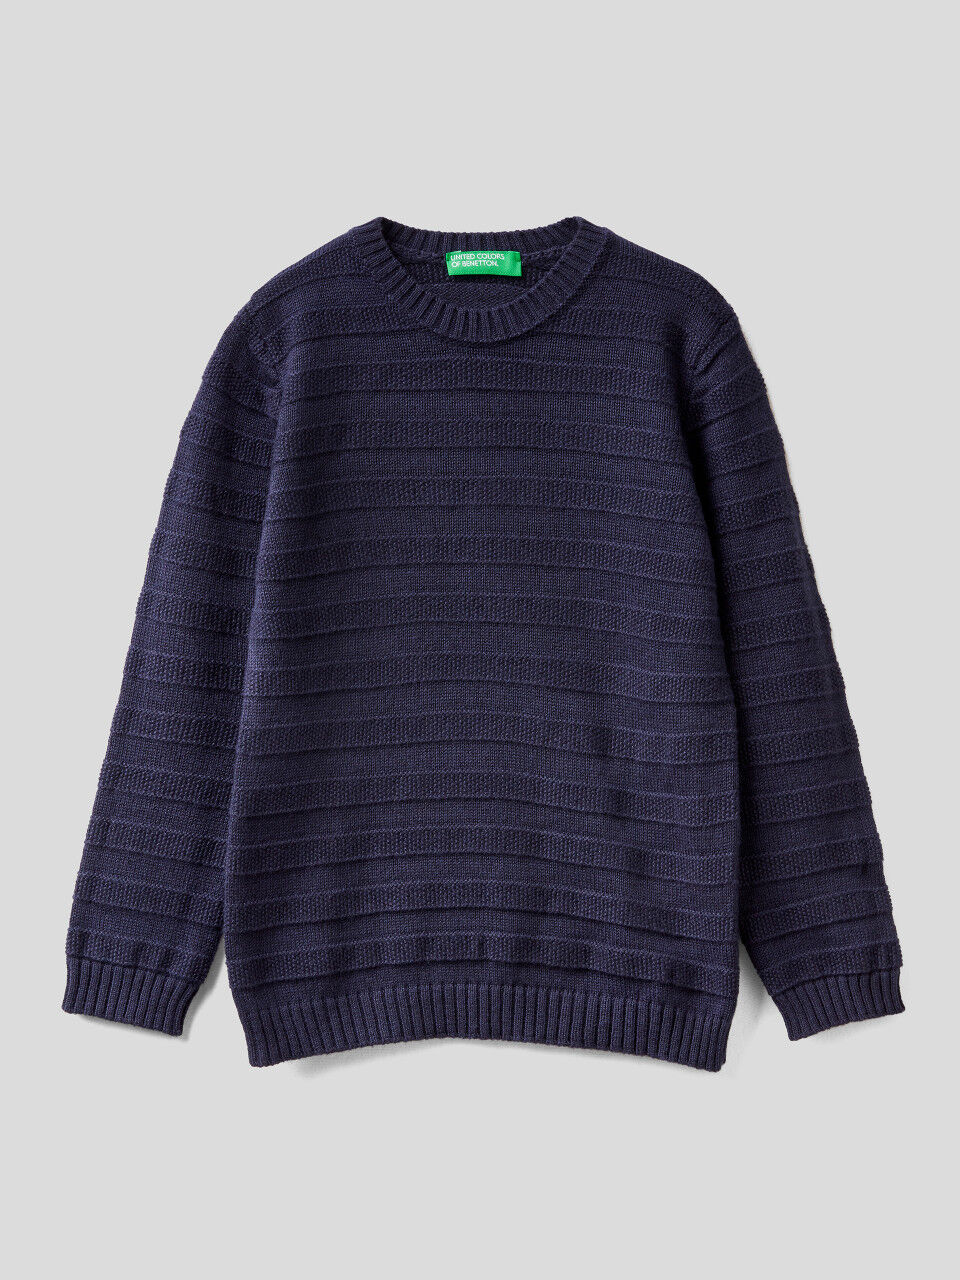 Black 10Y United colors of benetton jumper KIDS FASHION Jumpers & Sweatshirts NO STYLE discount 99% 